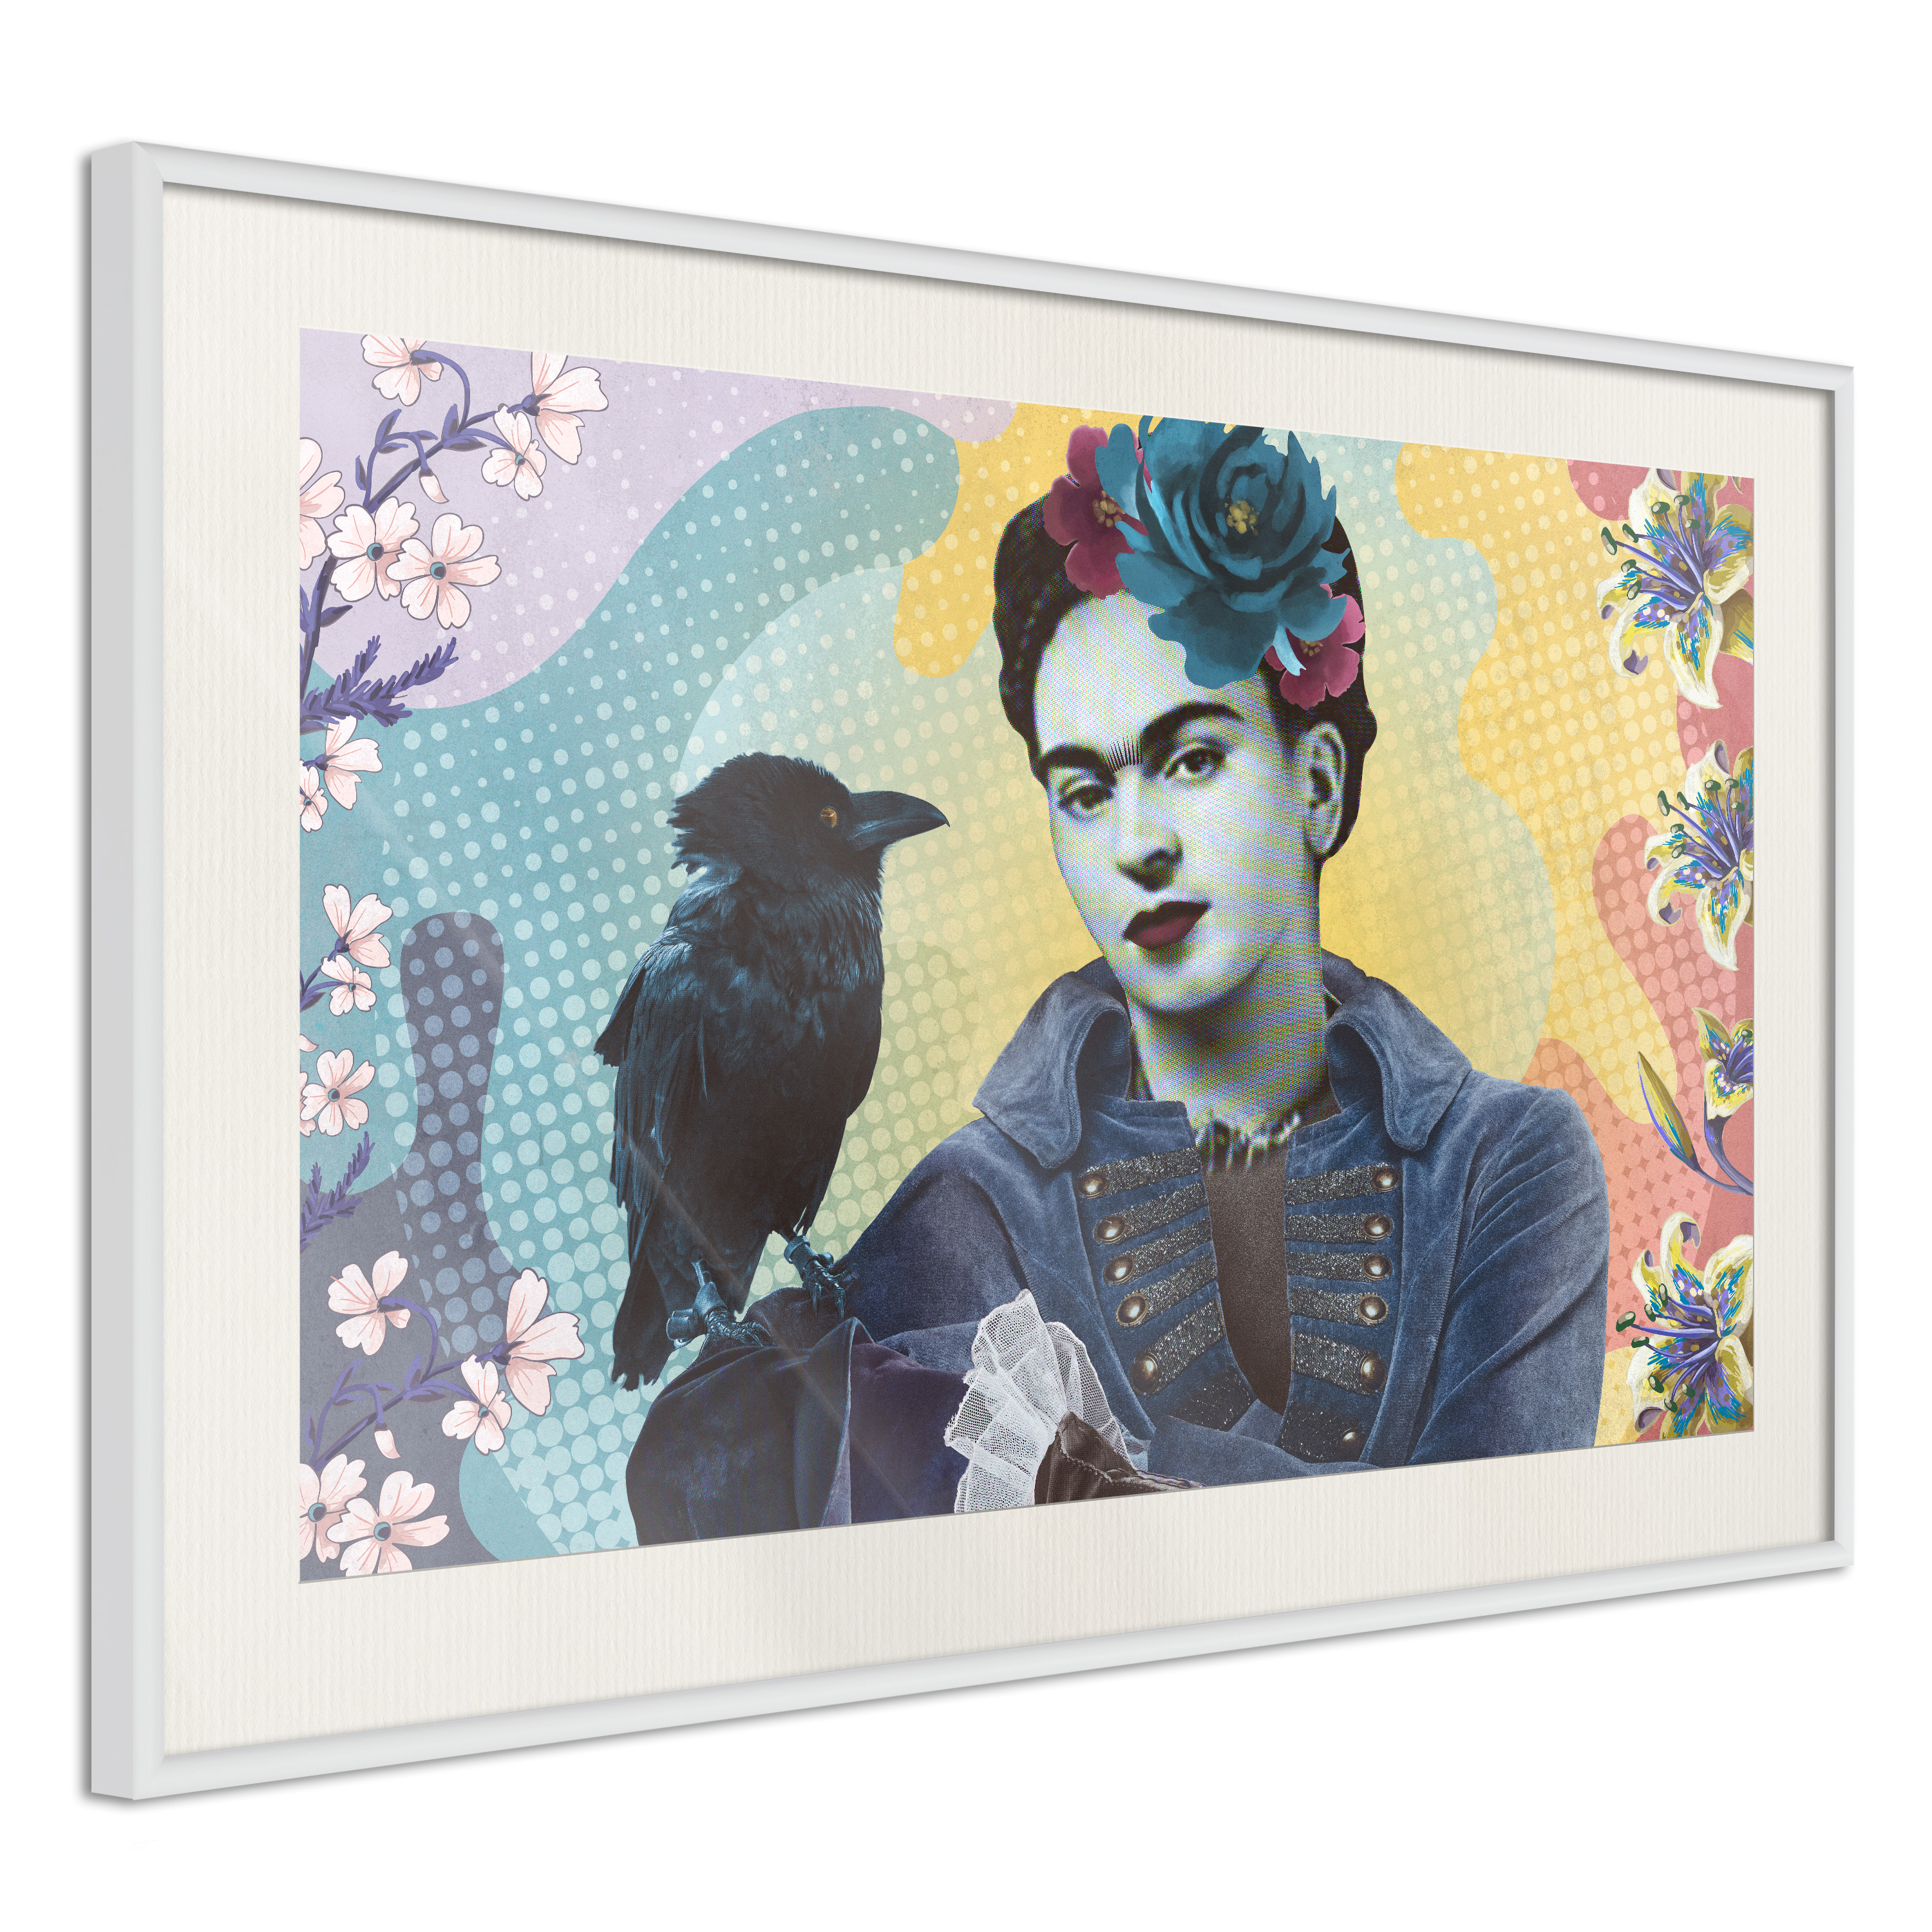 Poster - Frida with a Raven - 30x20